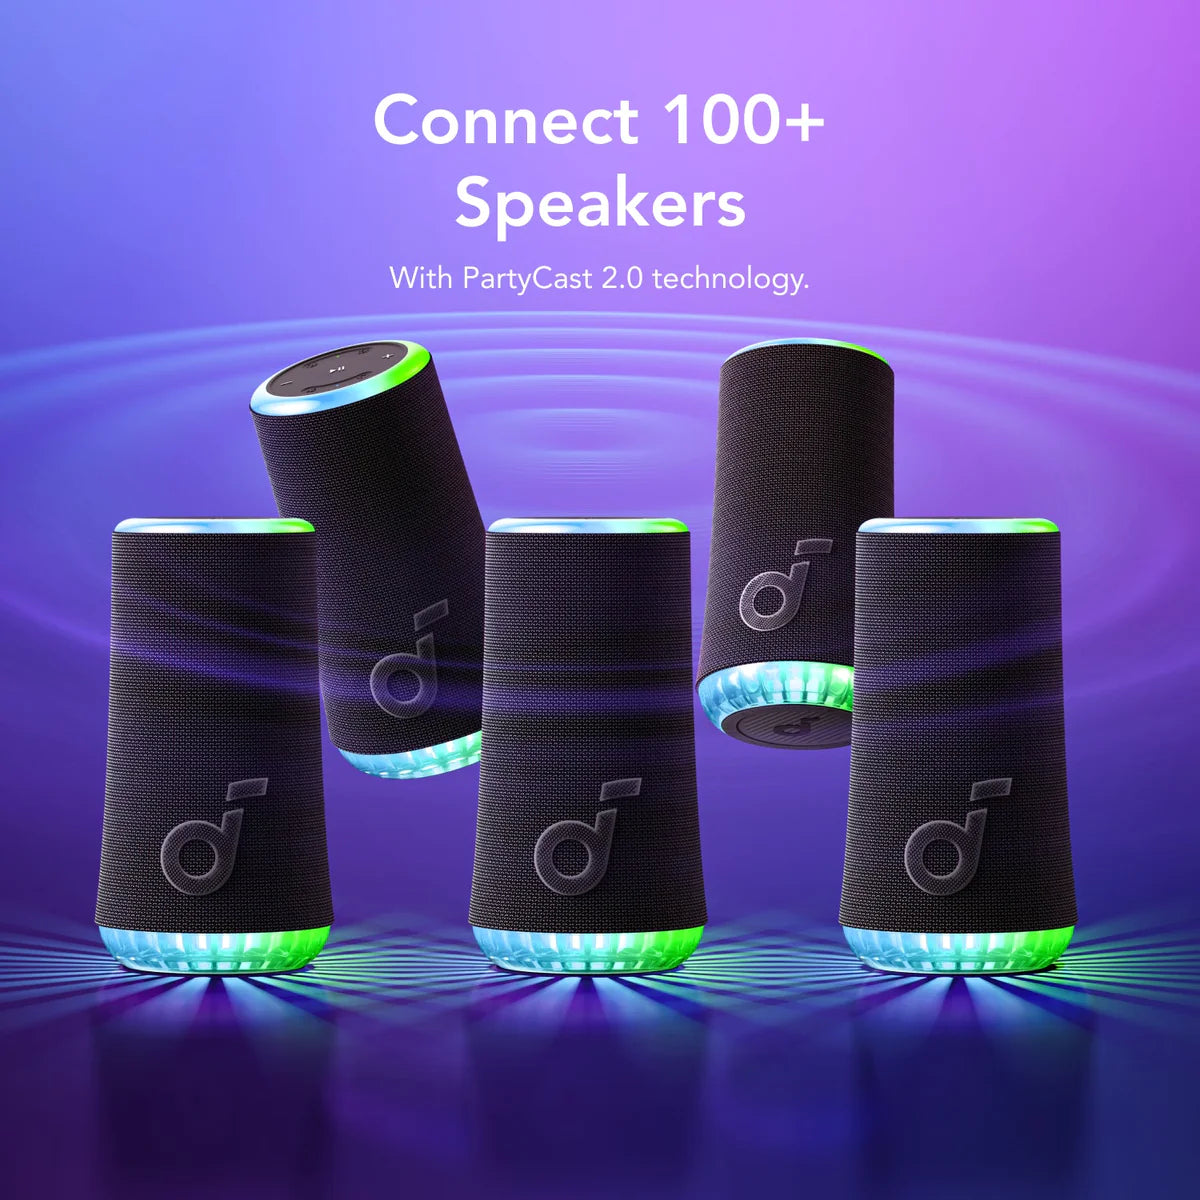 Glow | Portable Speaker with Synchronized Light Show